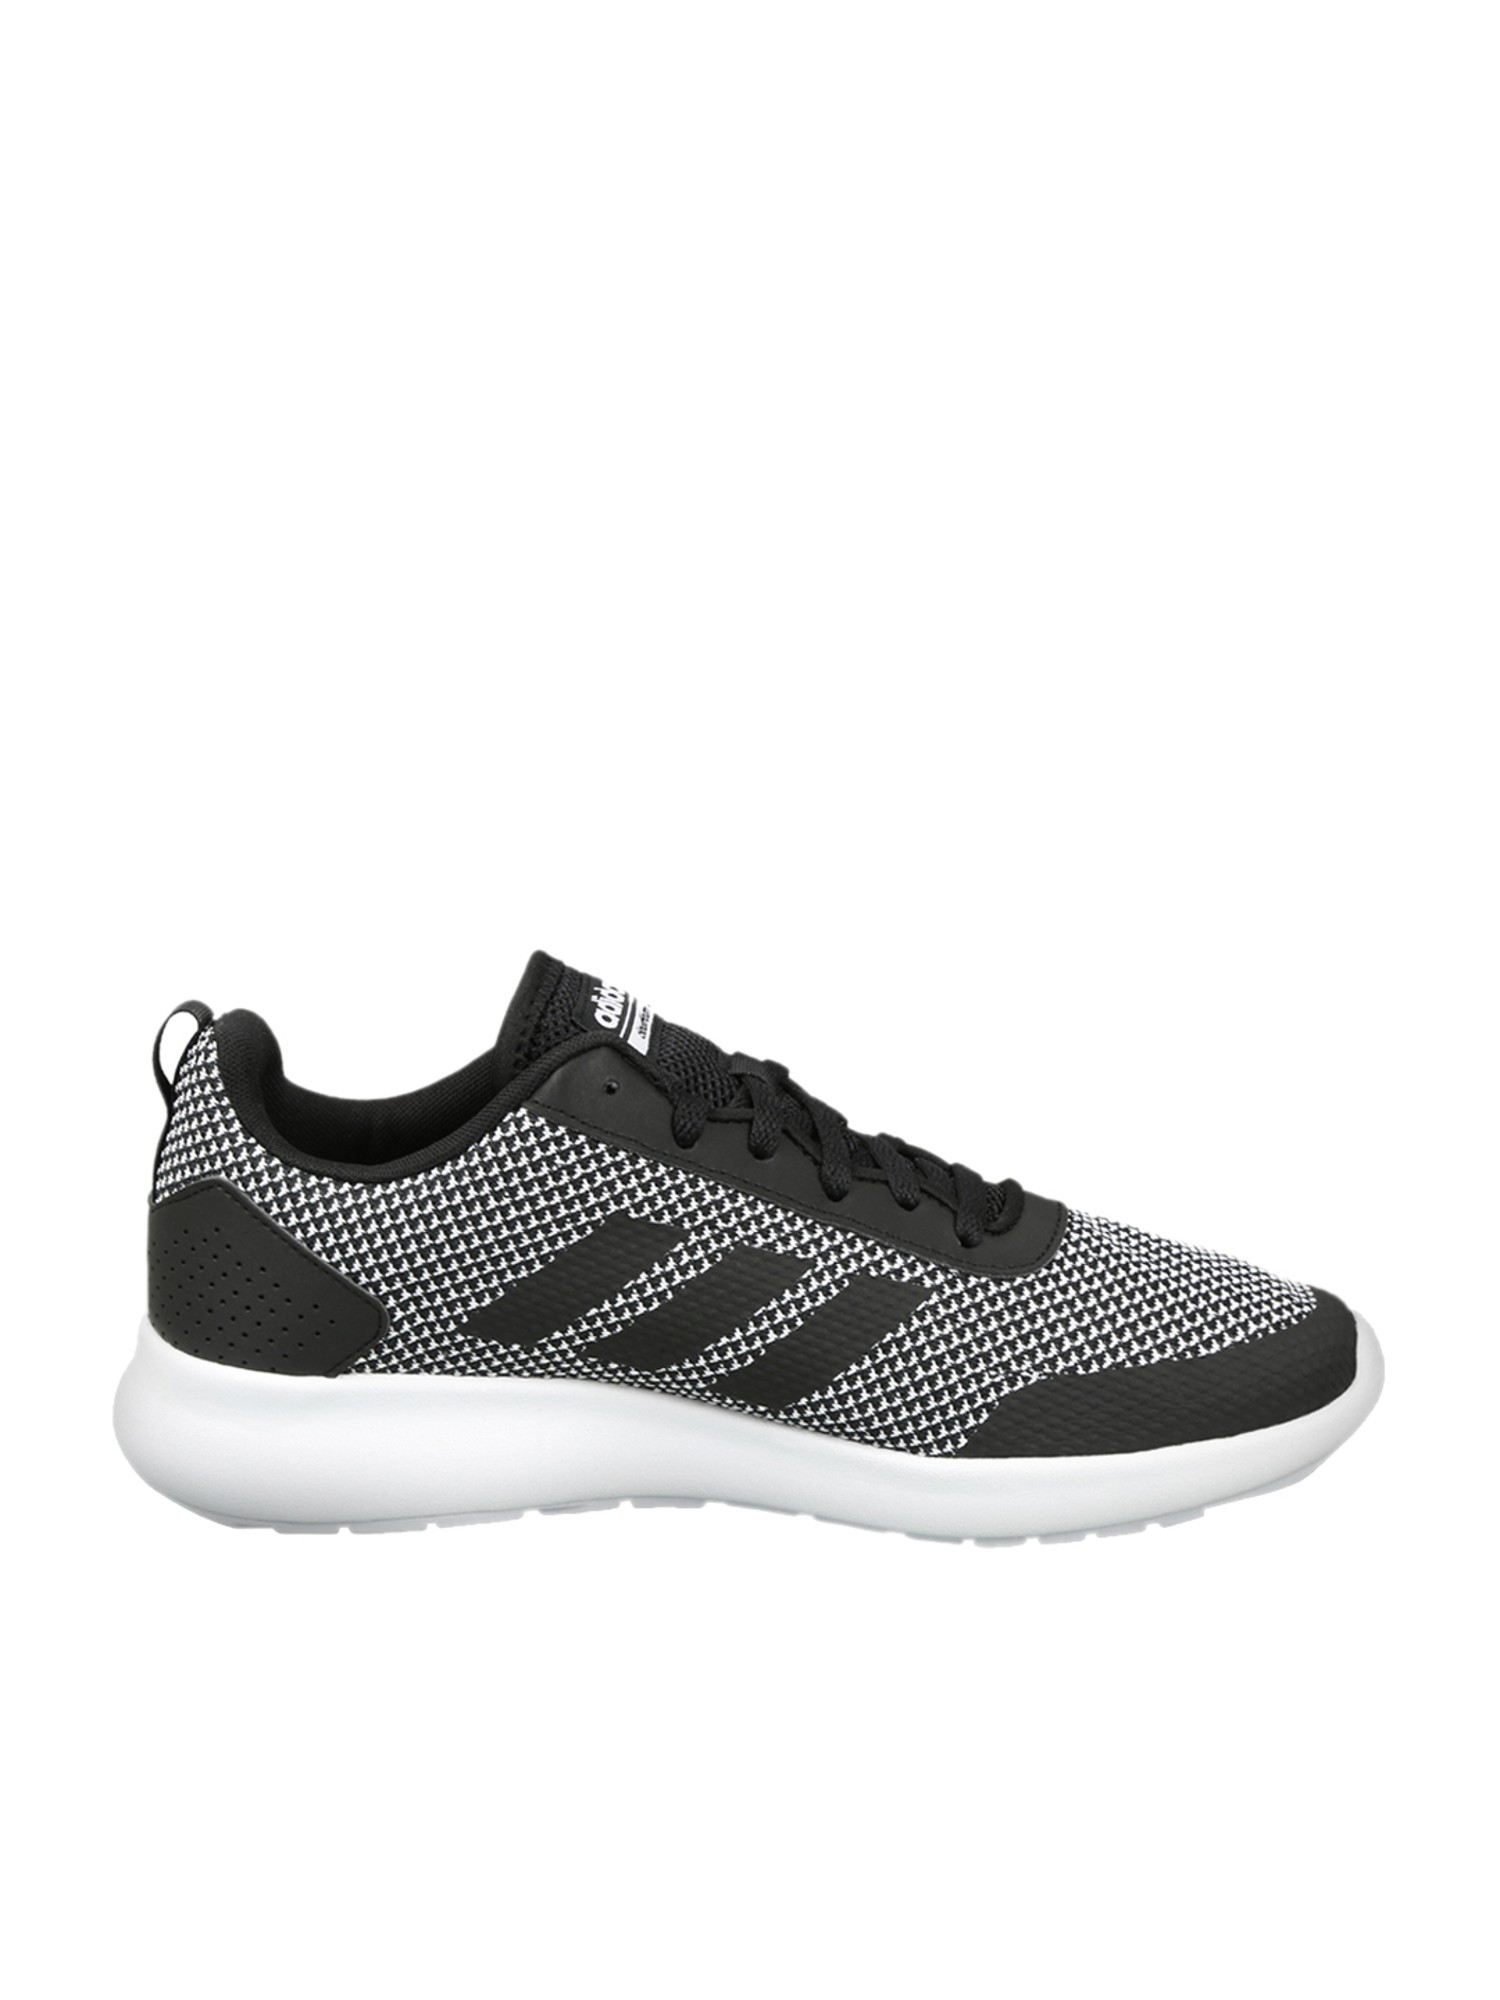 argecy black running shoes